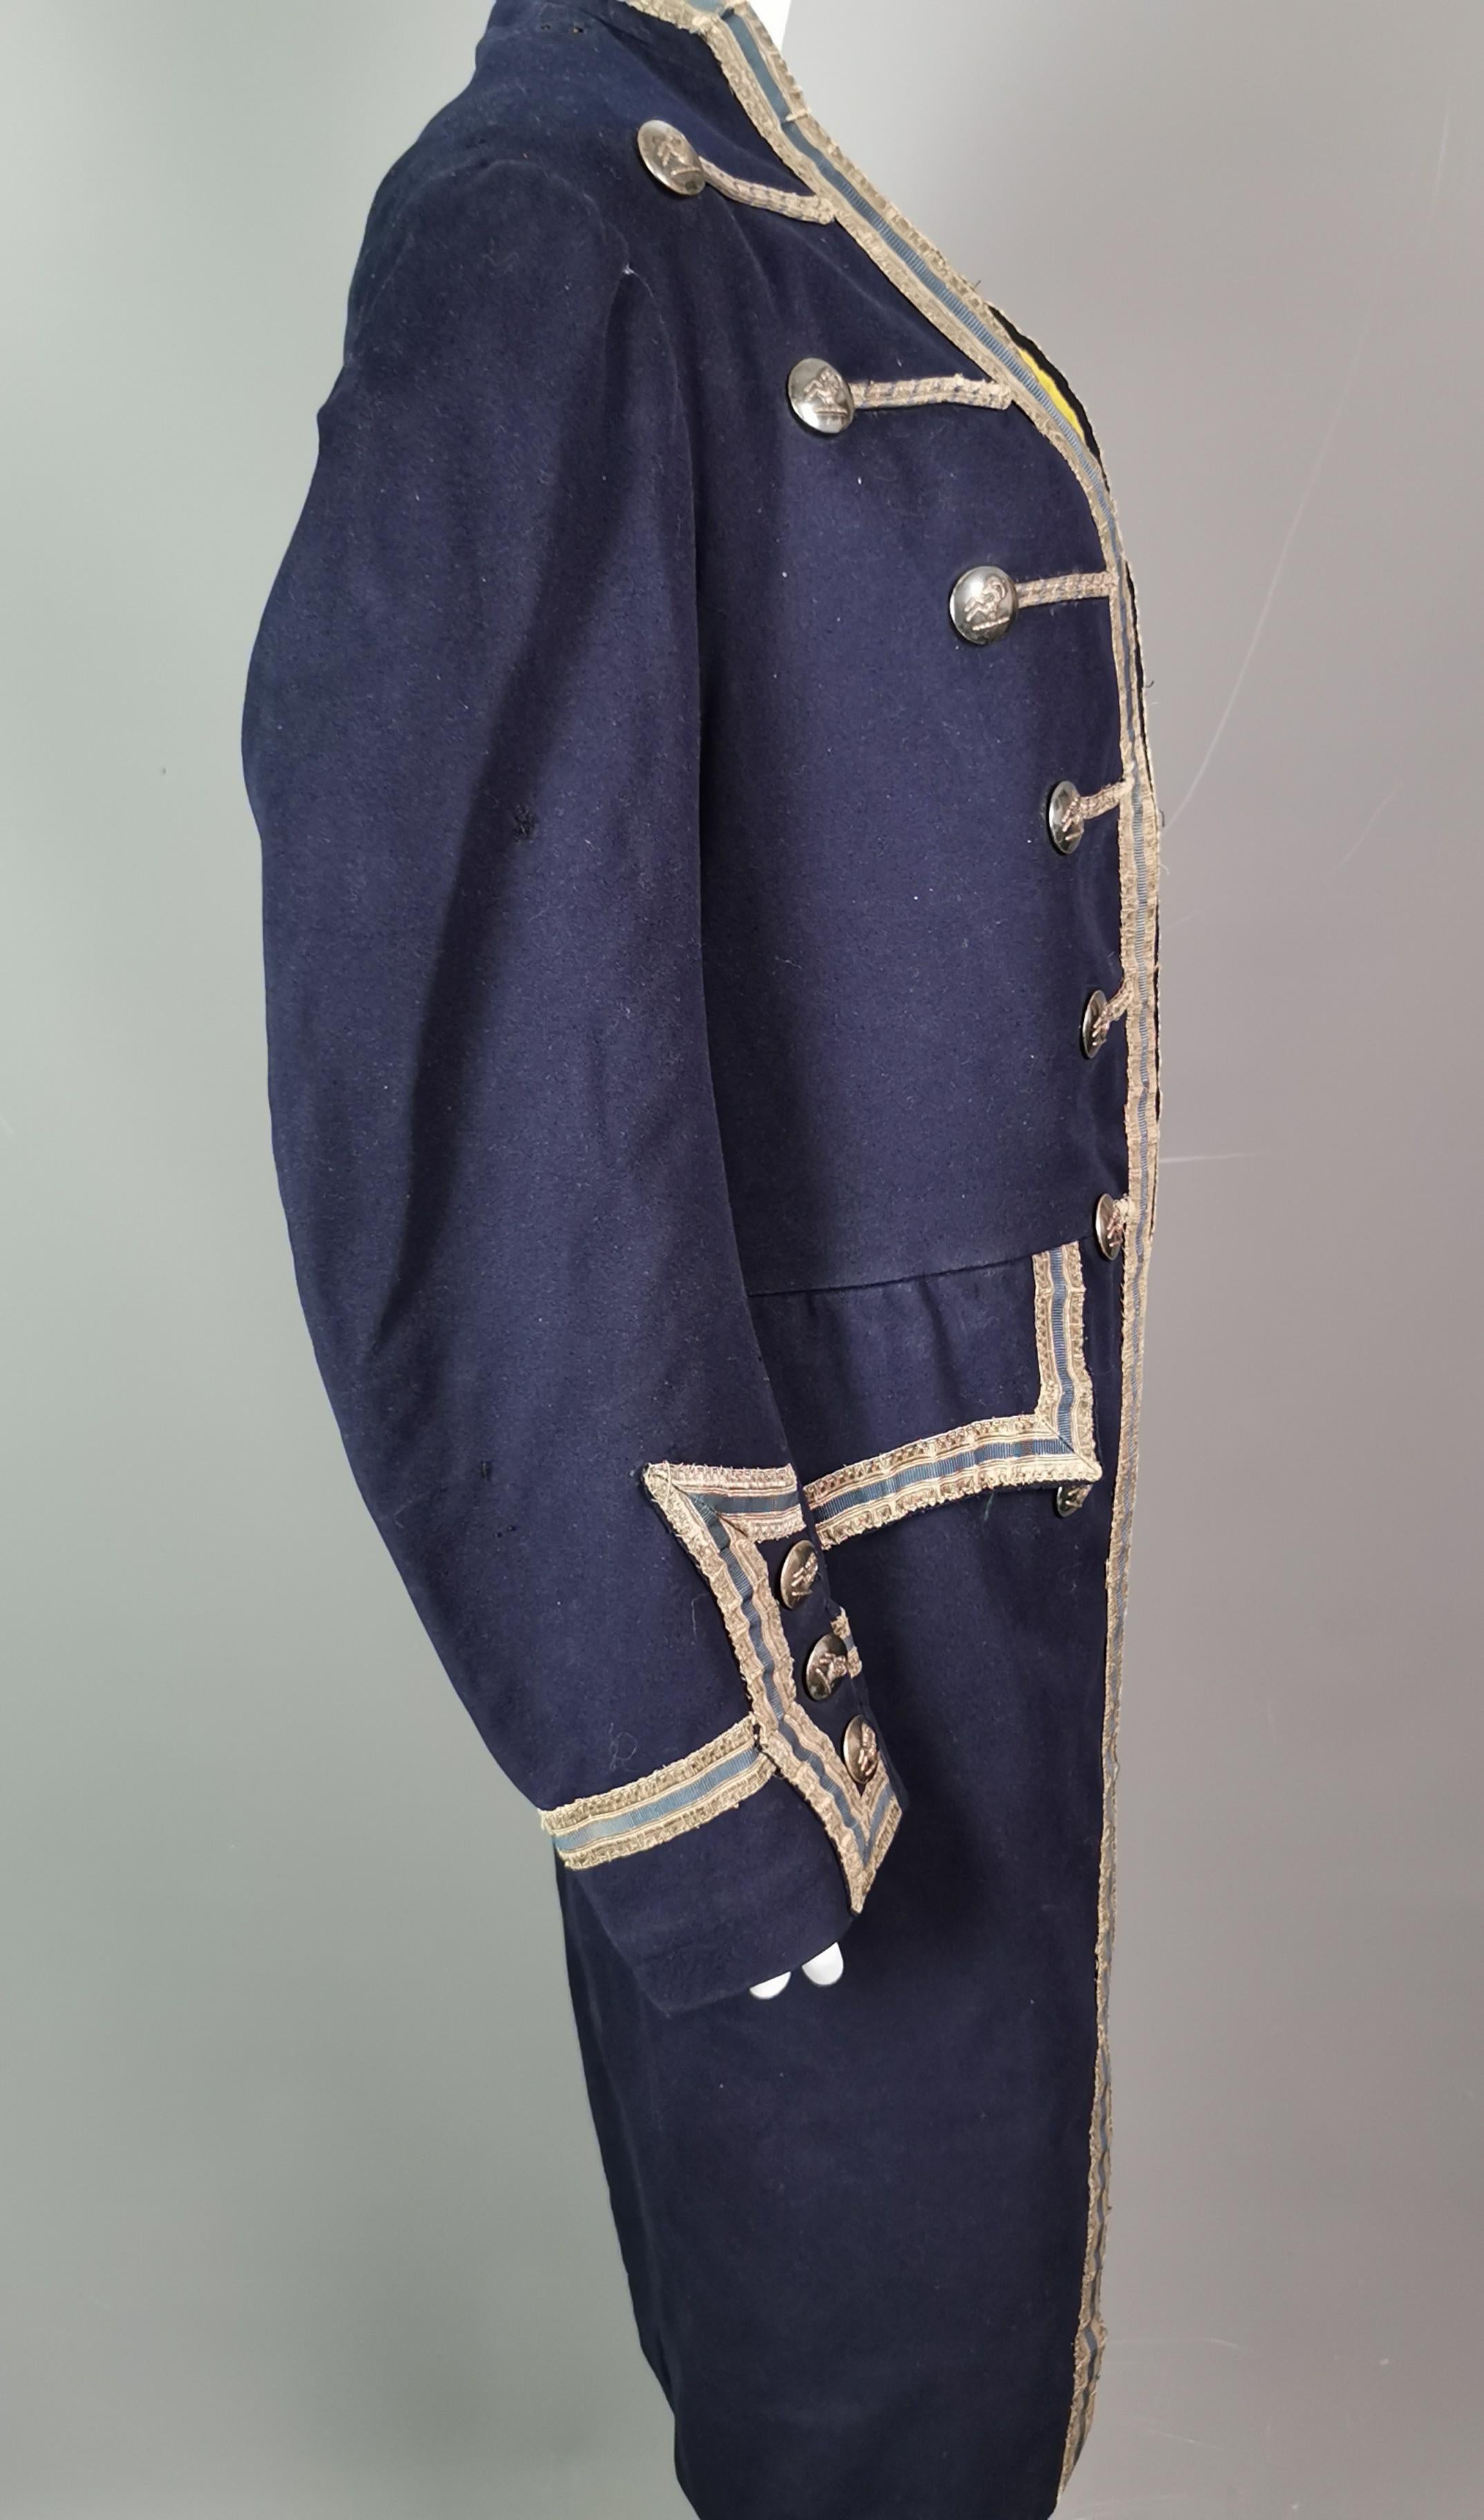 Antique theatrical costume, 18th century military style frock coat, Edwardian  5